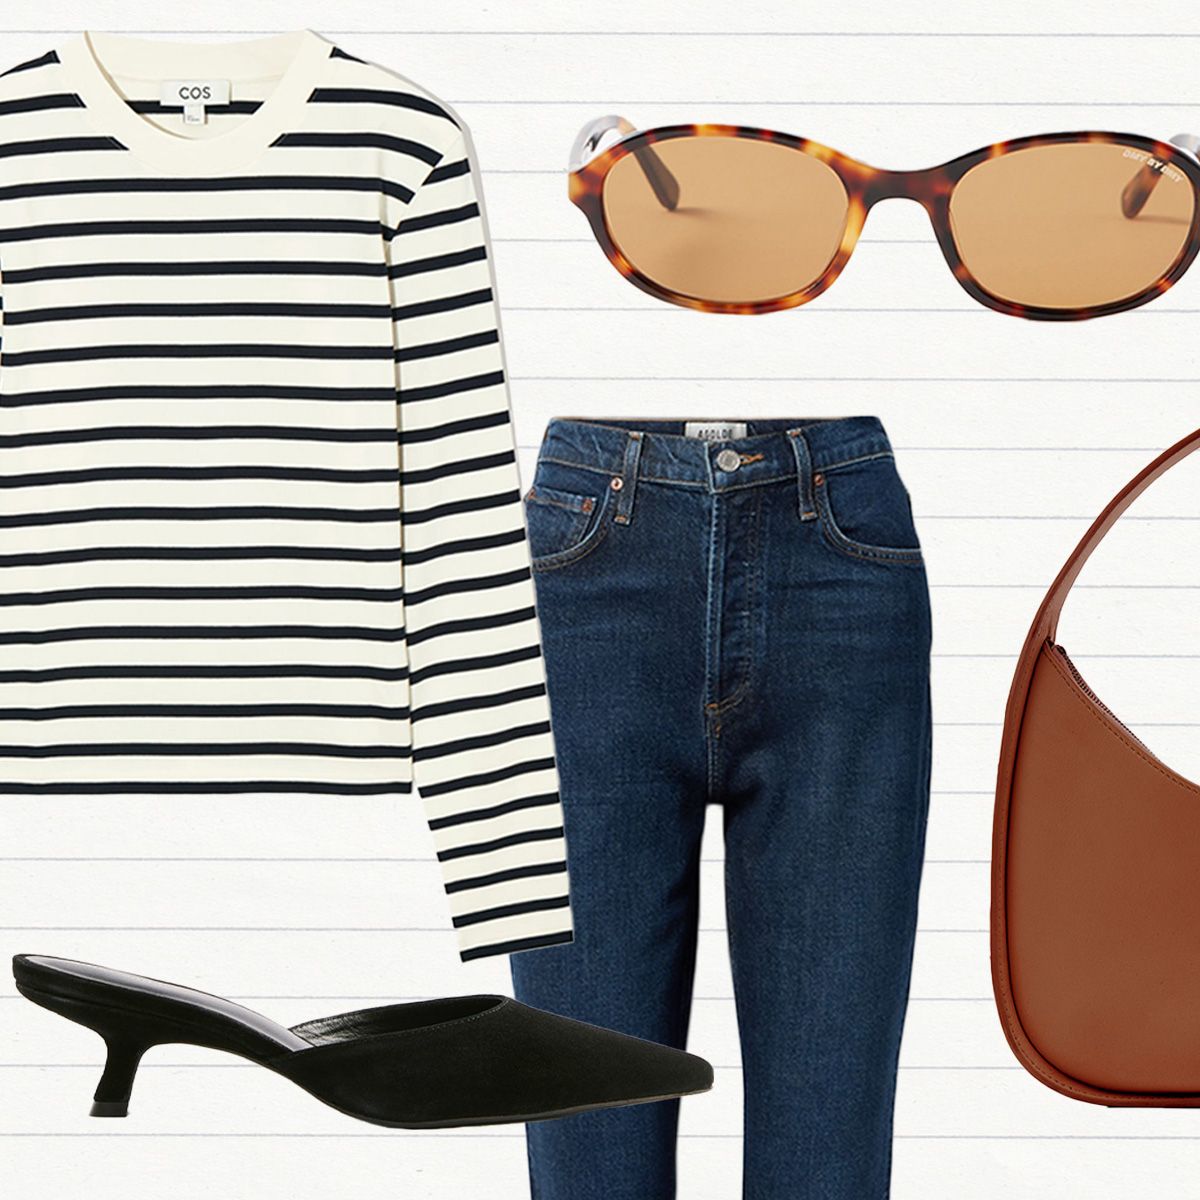 14 Items That Make Up an Elevated Travel Capsule Wardrobe